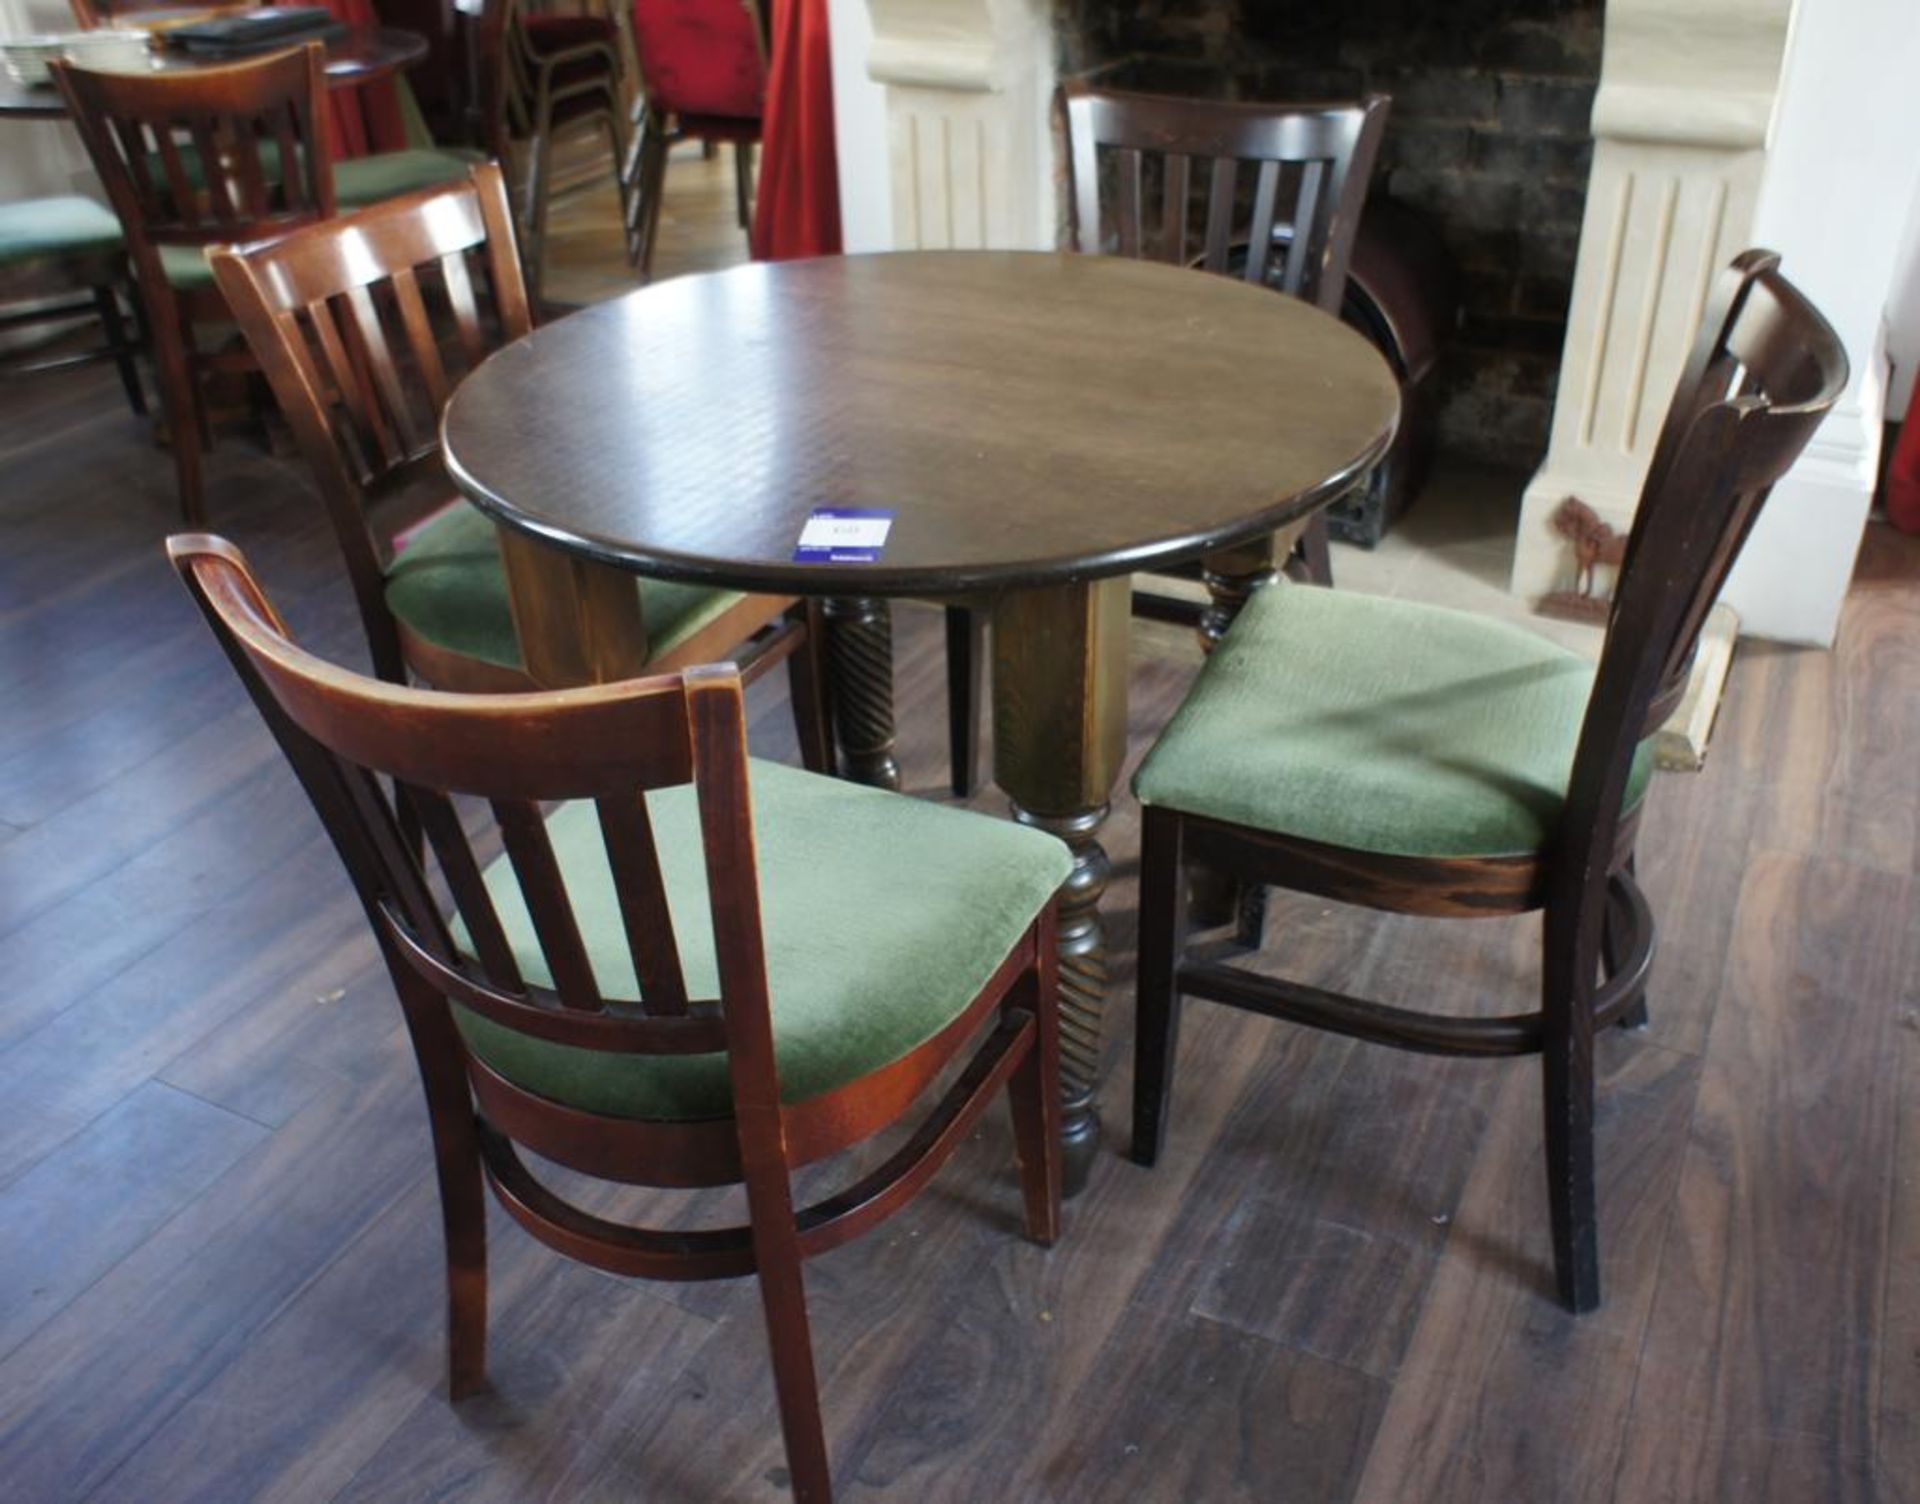 Oak Effect Circular Table 900mm Diameter with 4 x Oak Effect Part Upholstered Chairs - Image 3 of 3